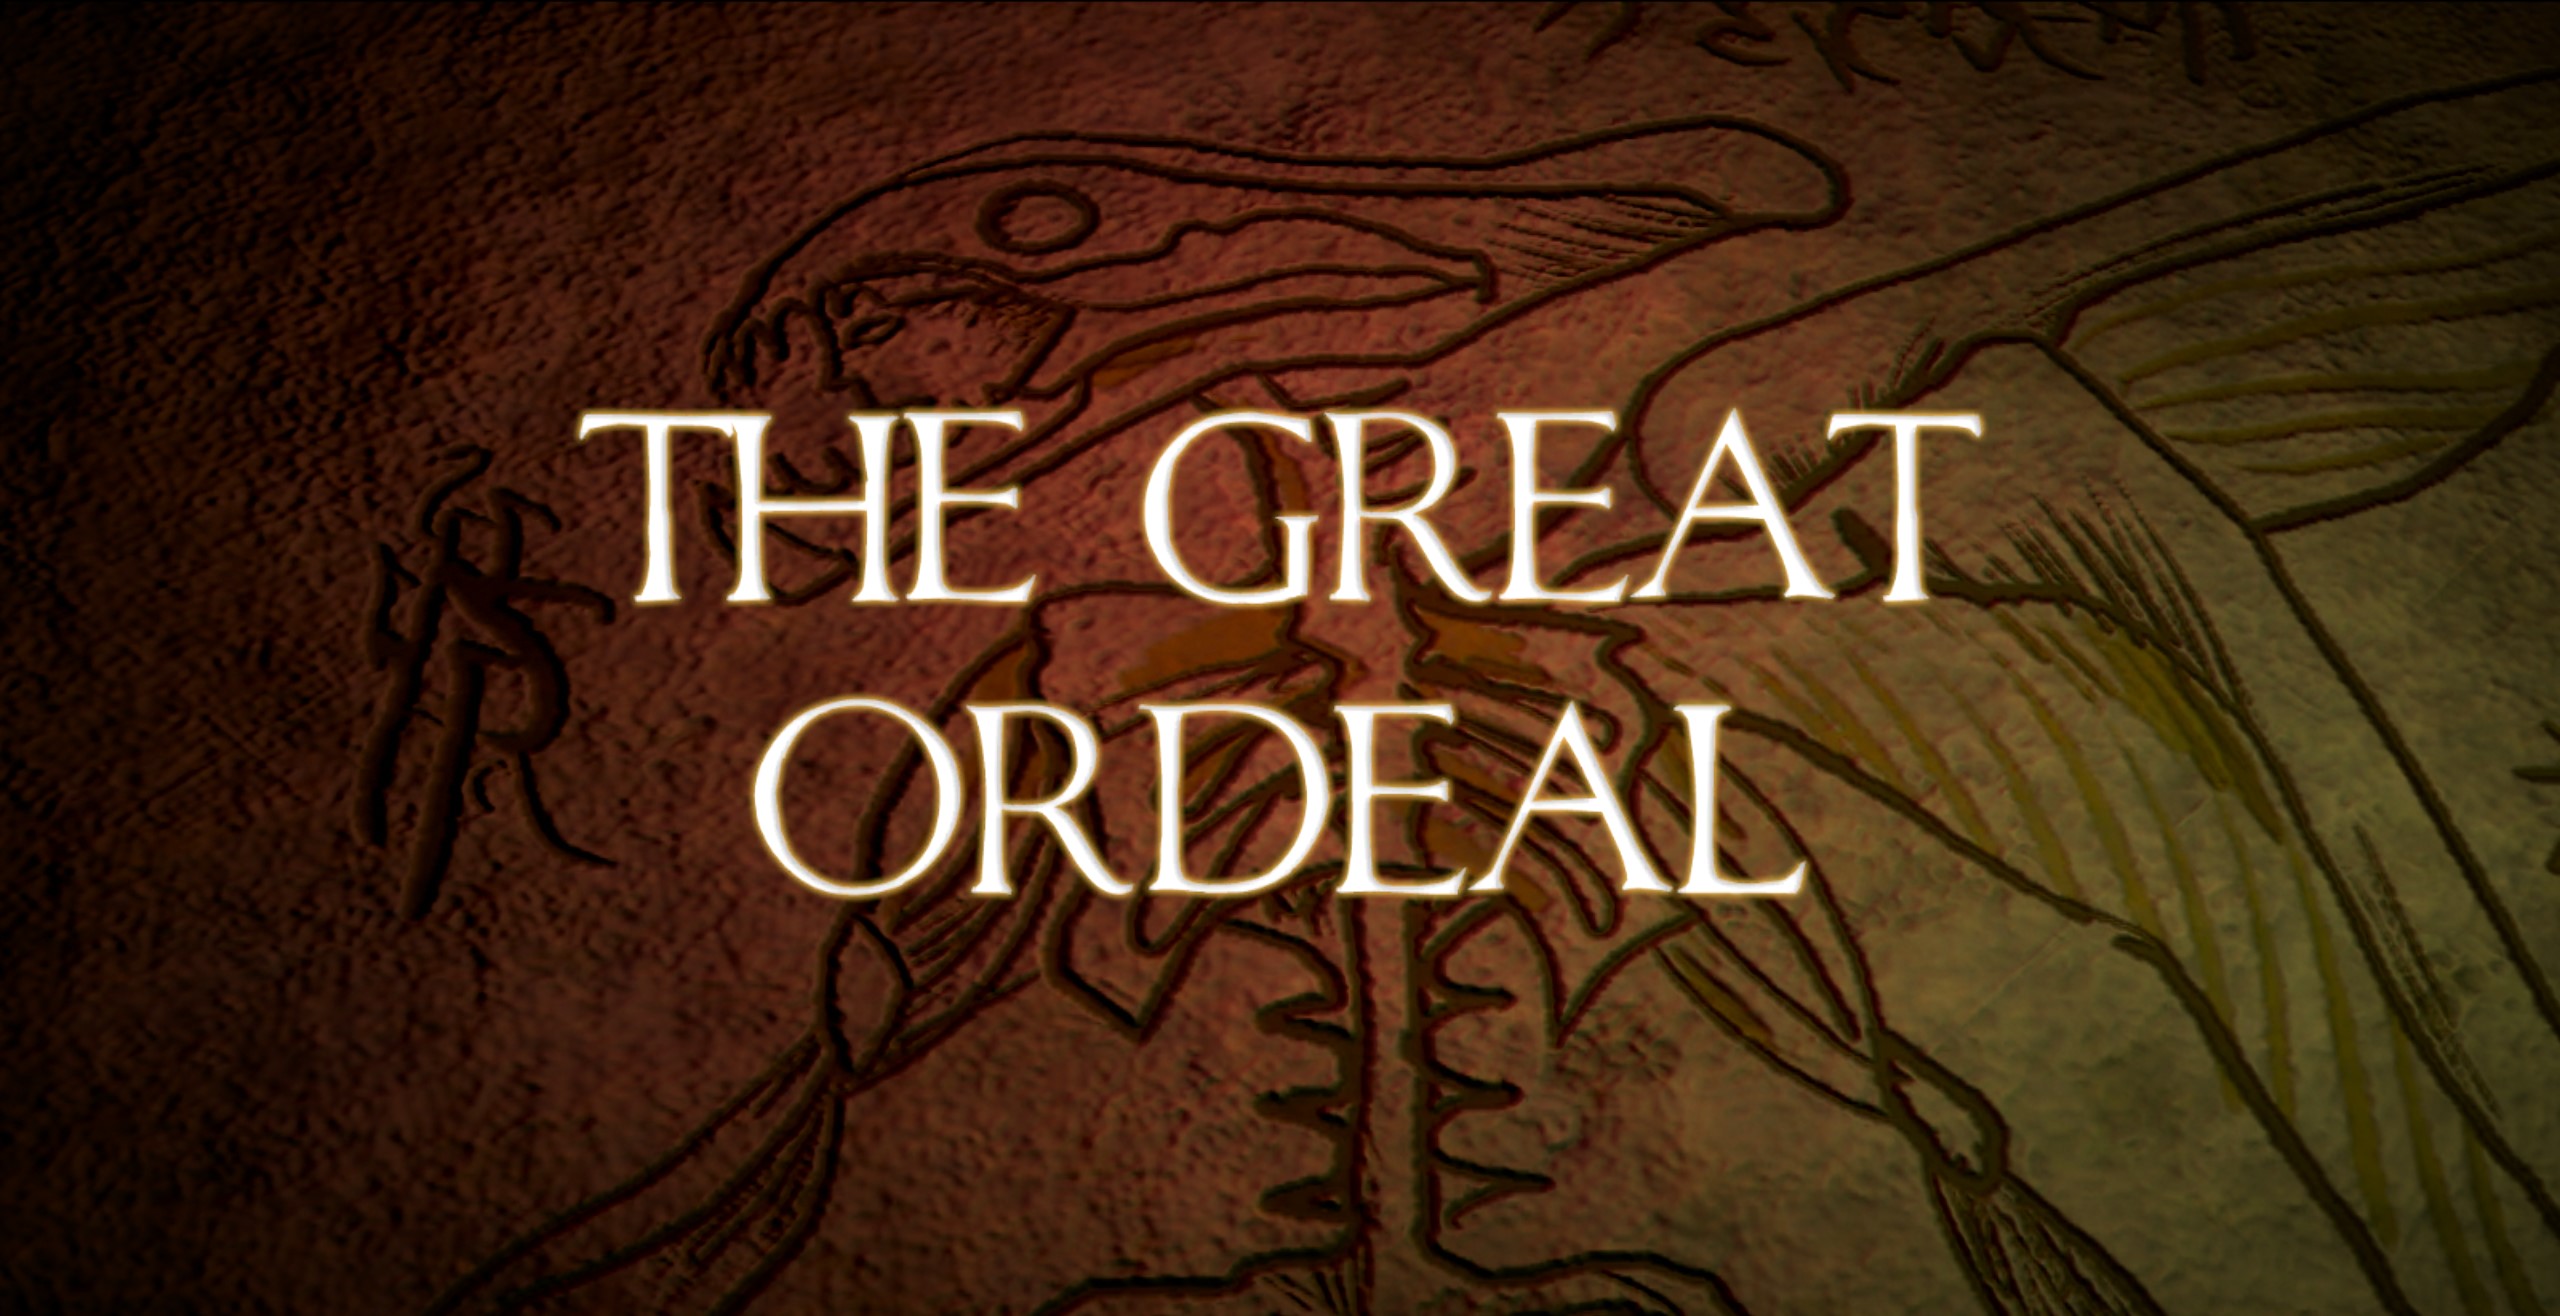 The Great Ordeal